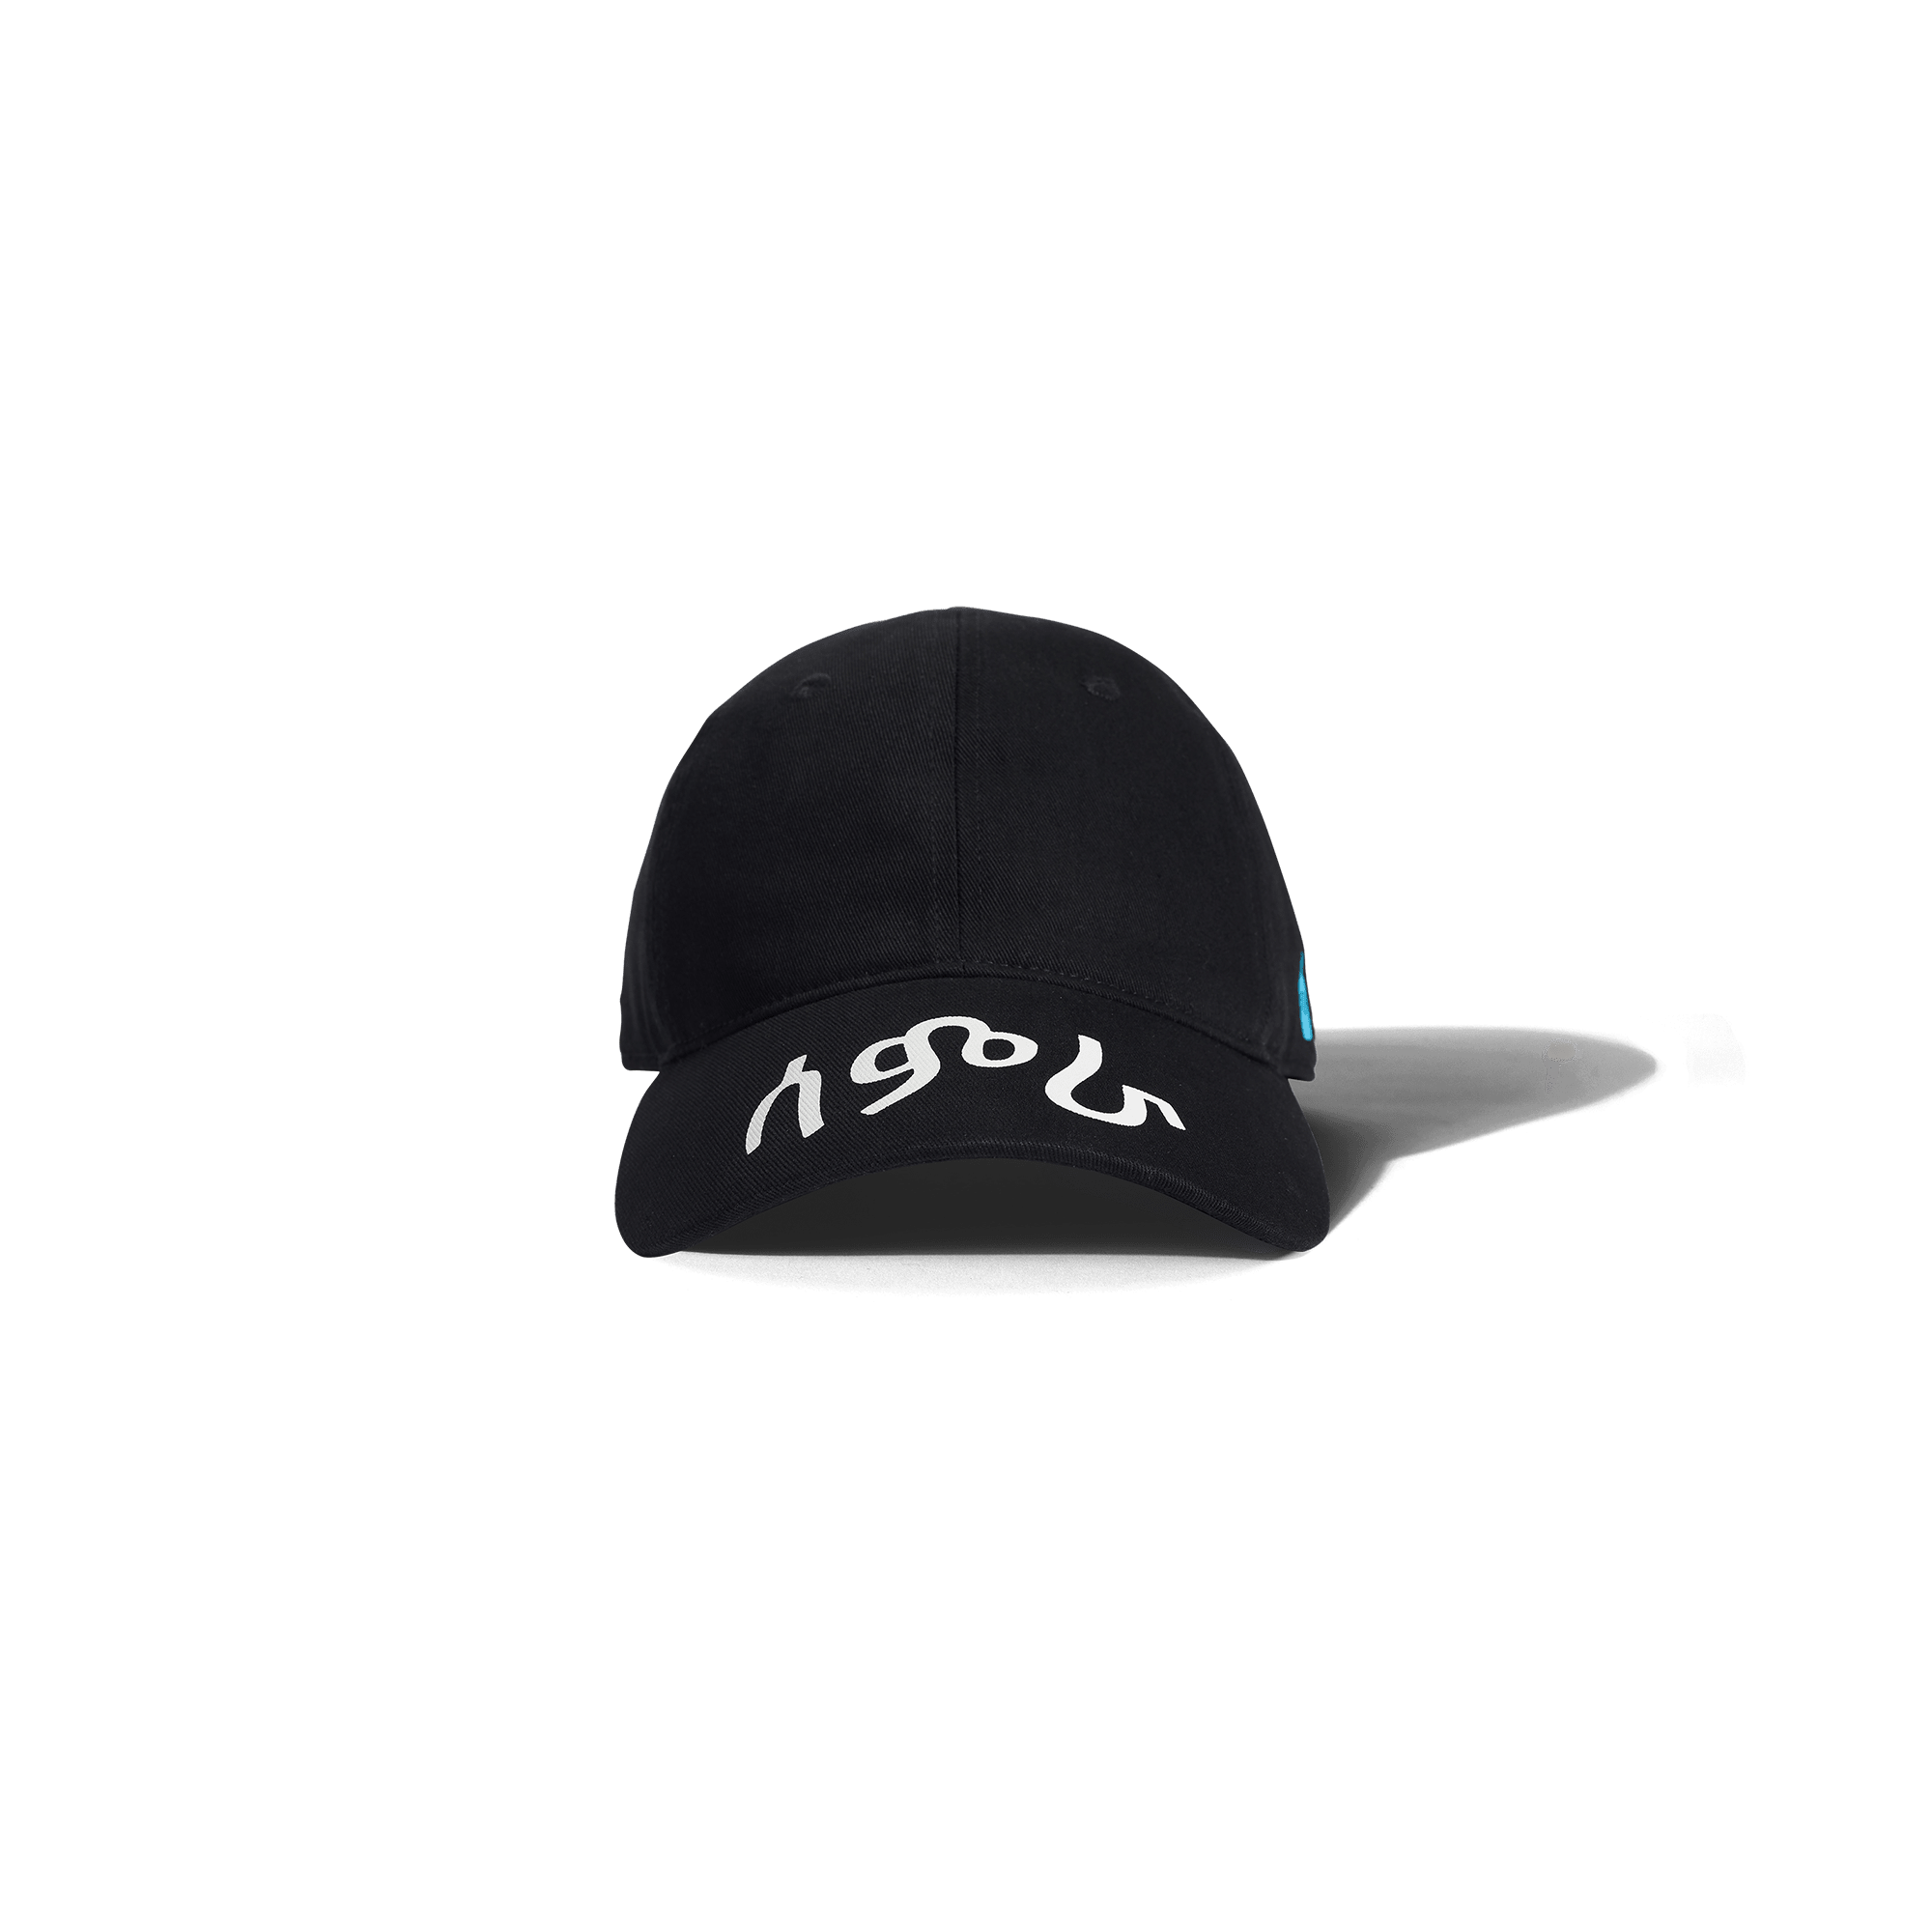  Mother's Day Baseball Caps Dad Hats Adjustable Size